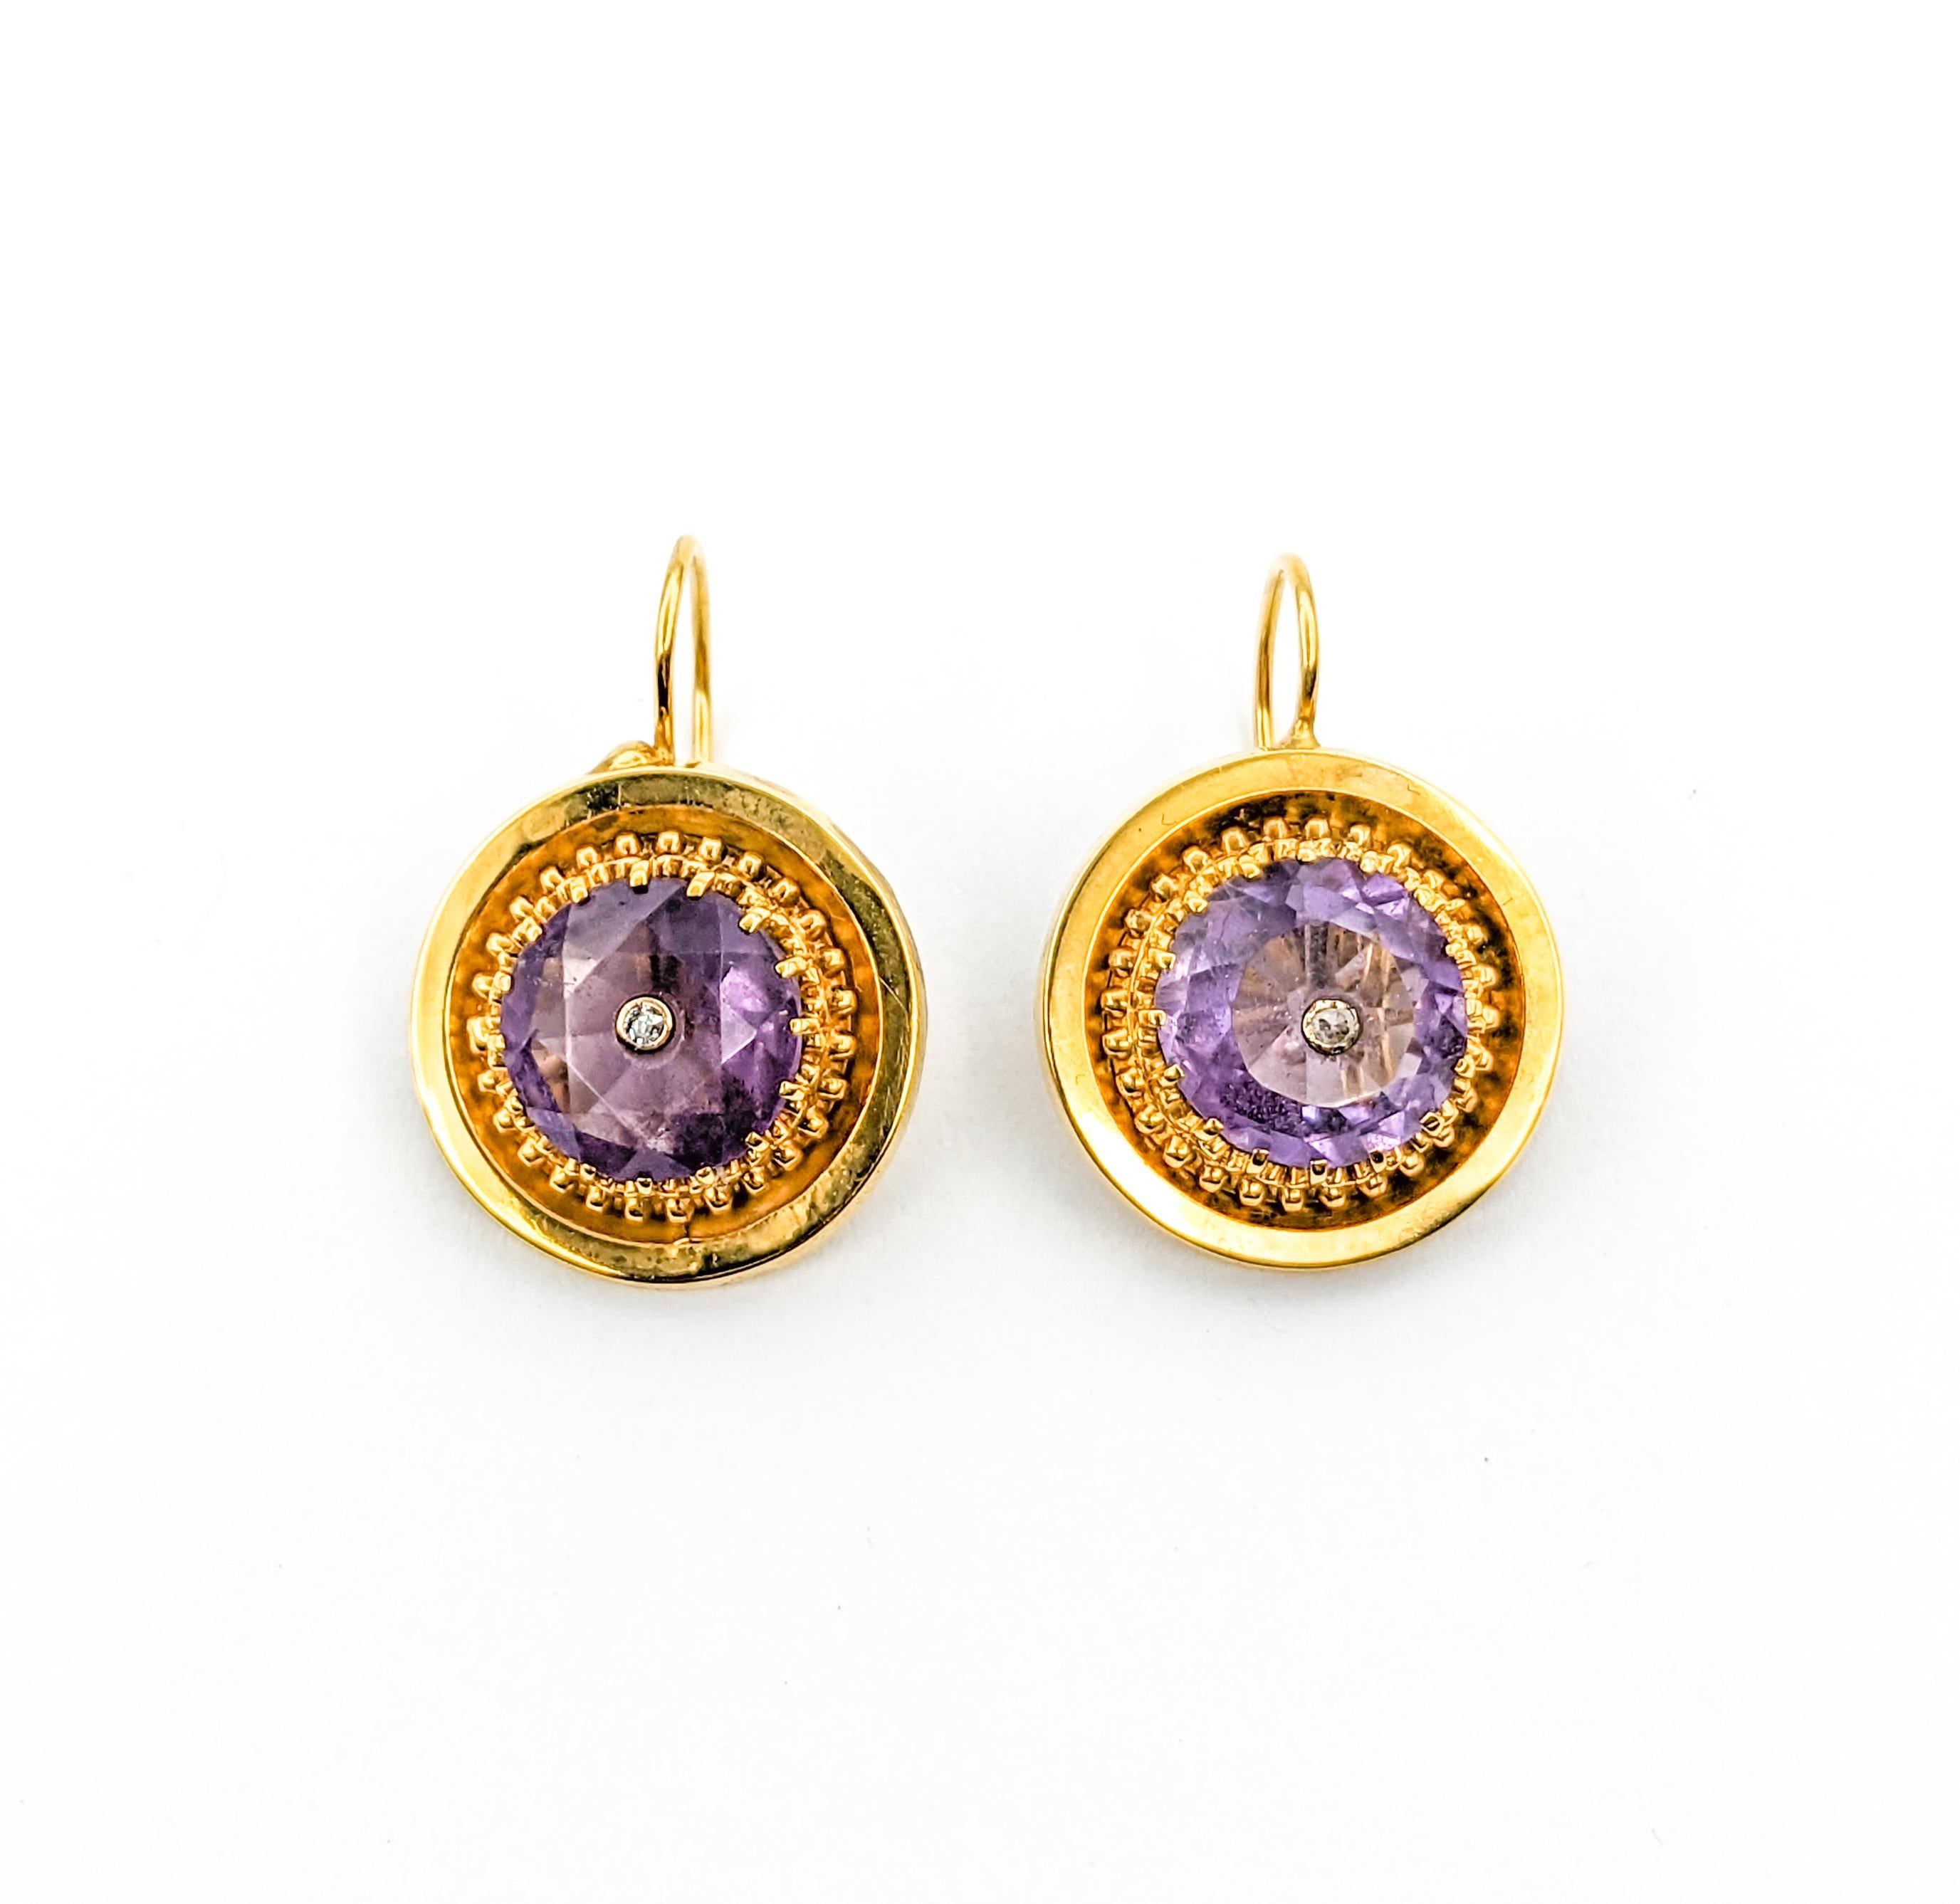 Romantic Diamond & Amethyst Drop Earrings in Yellow Gold

Exquisitely crafted in 14k yellow gold, these antique amethyst earrings are a testament to timeless design. These earrings feature a pair of  10mm faceted amethysts, adding a touch of royal